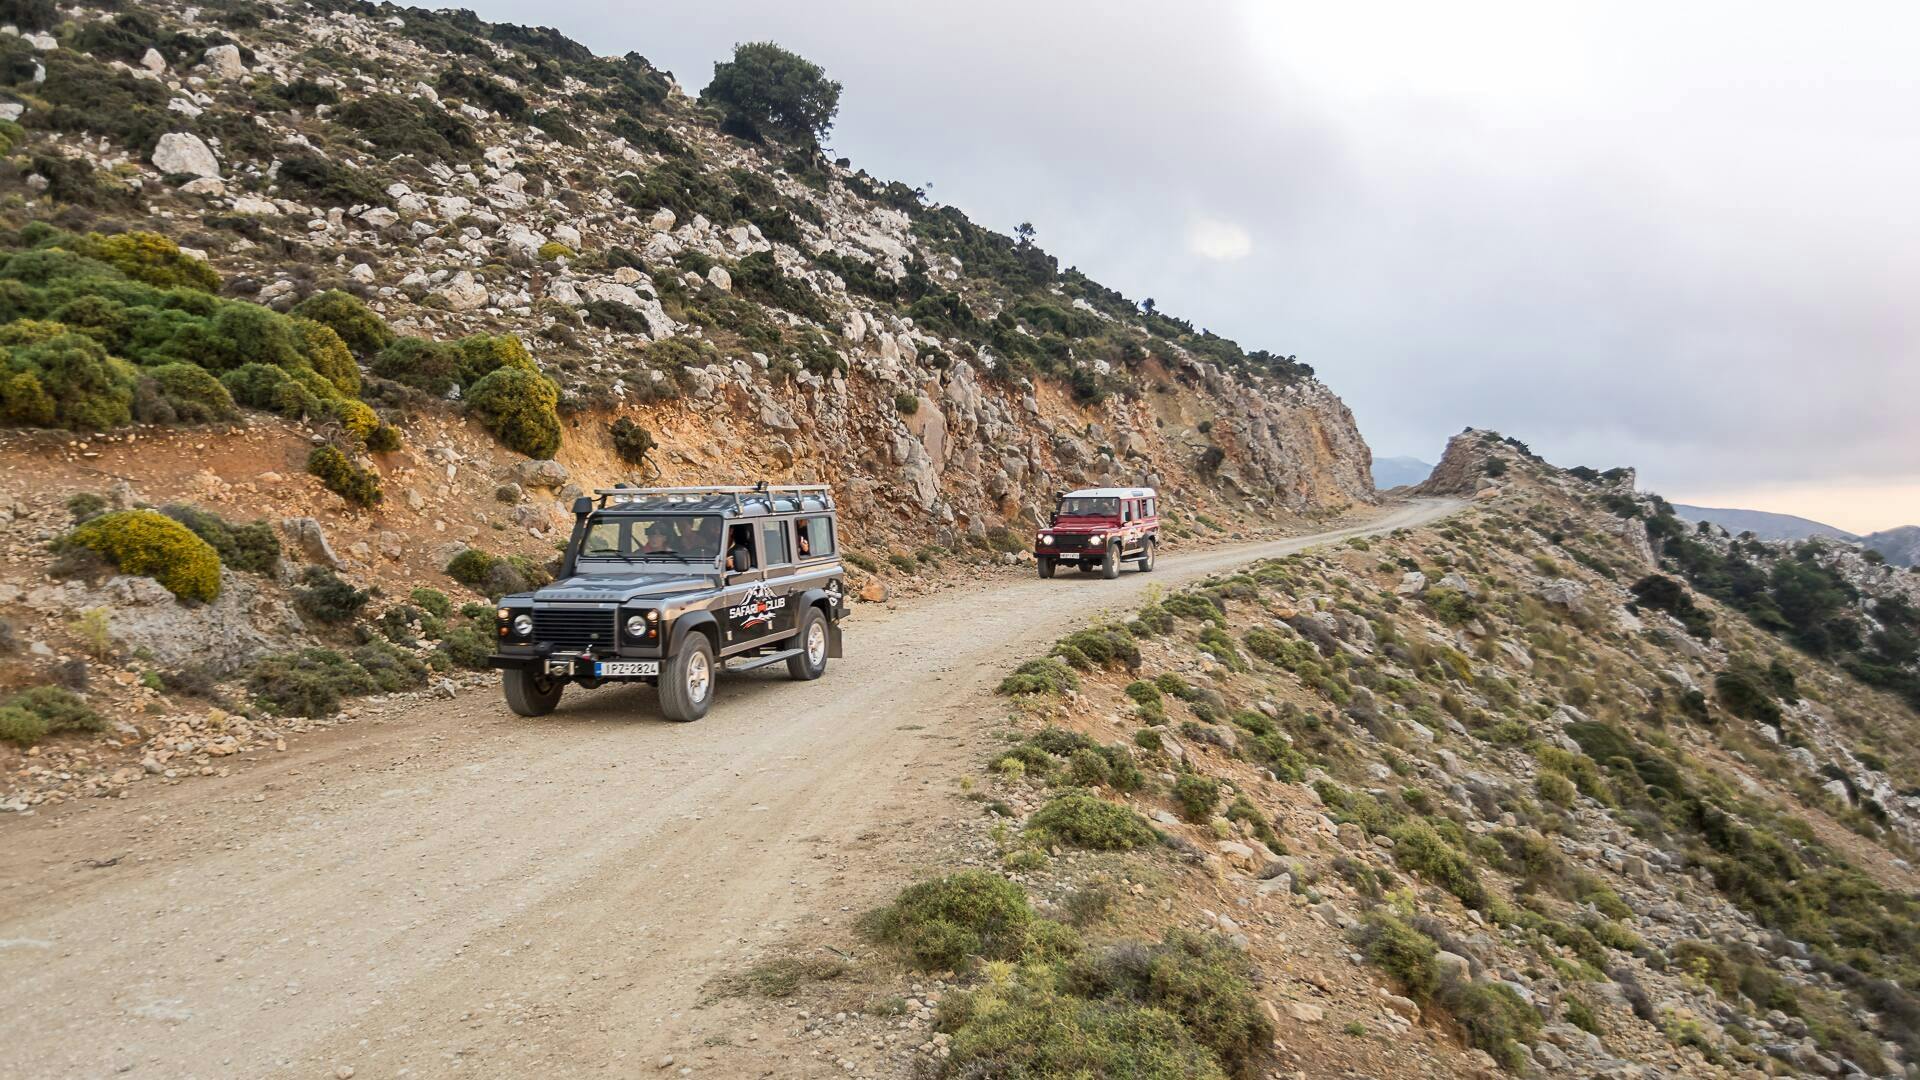 Southern Crete Mountain 4x4 Tour with Lunch